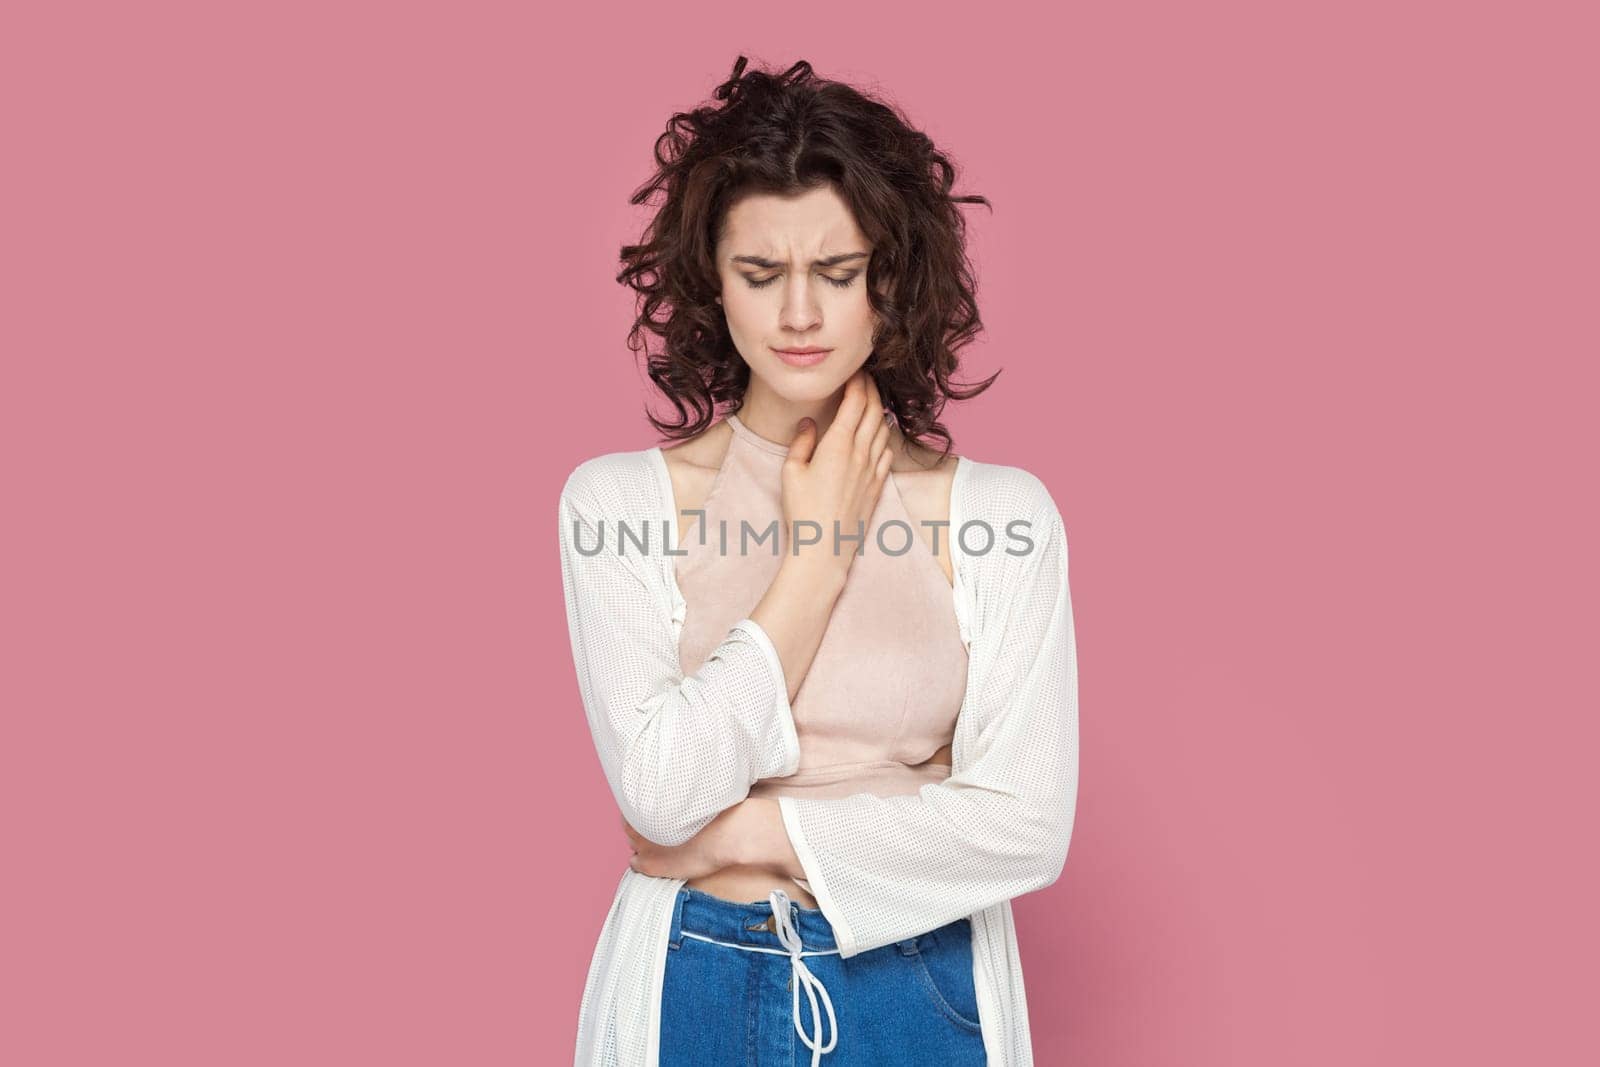 Portrait of sad upset unhappy woman with curly hair wearing casual style outfit standing looking down, crying, hearing bad news. Indoor studio shot isolated on pink background.